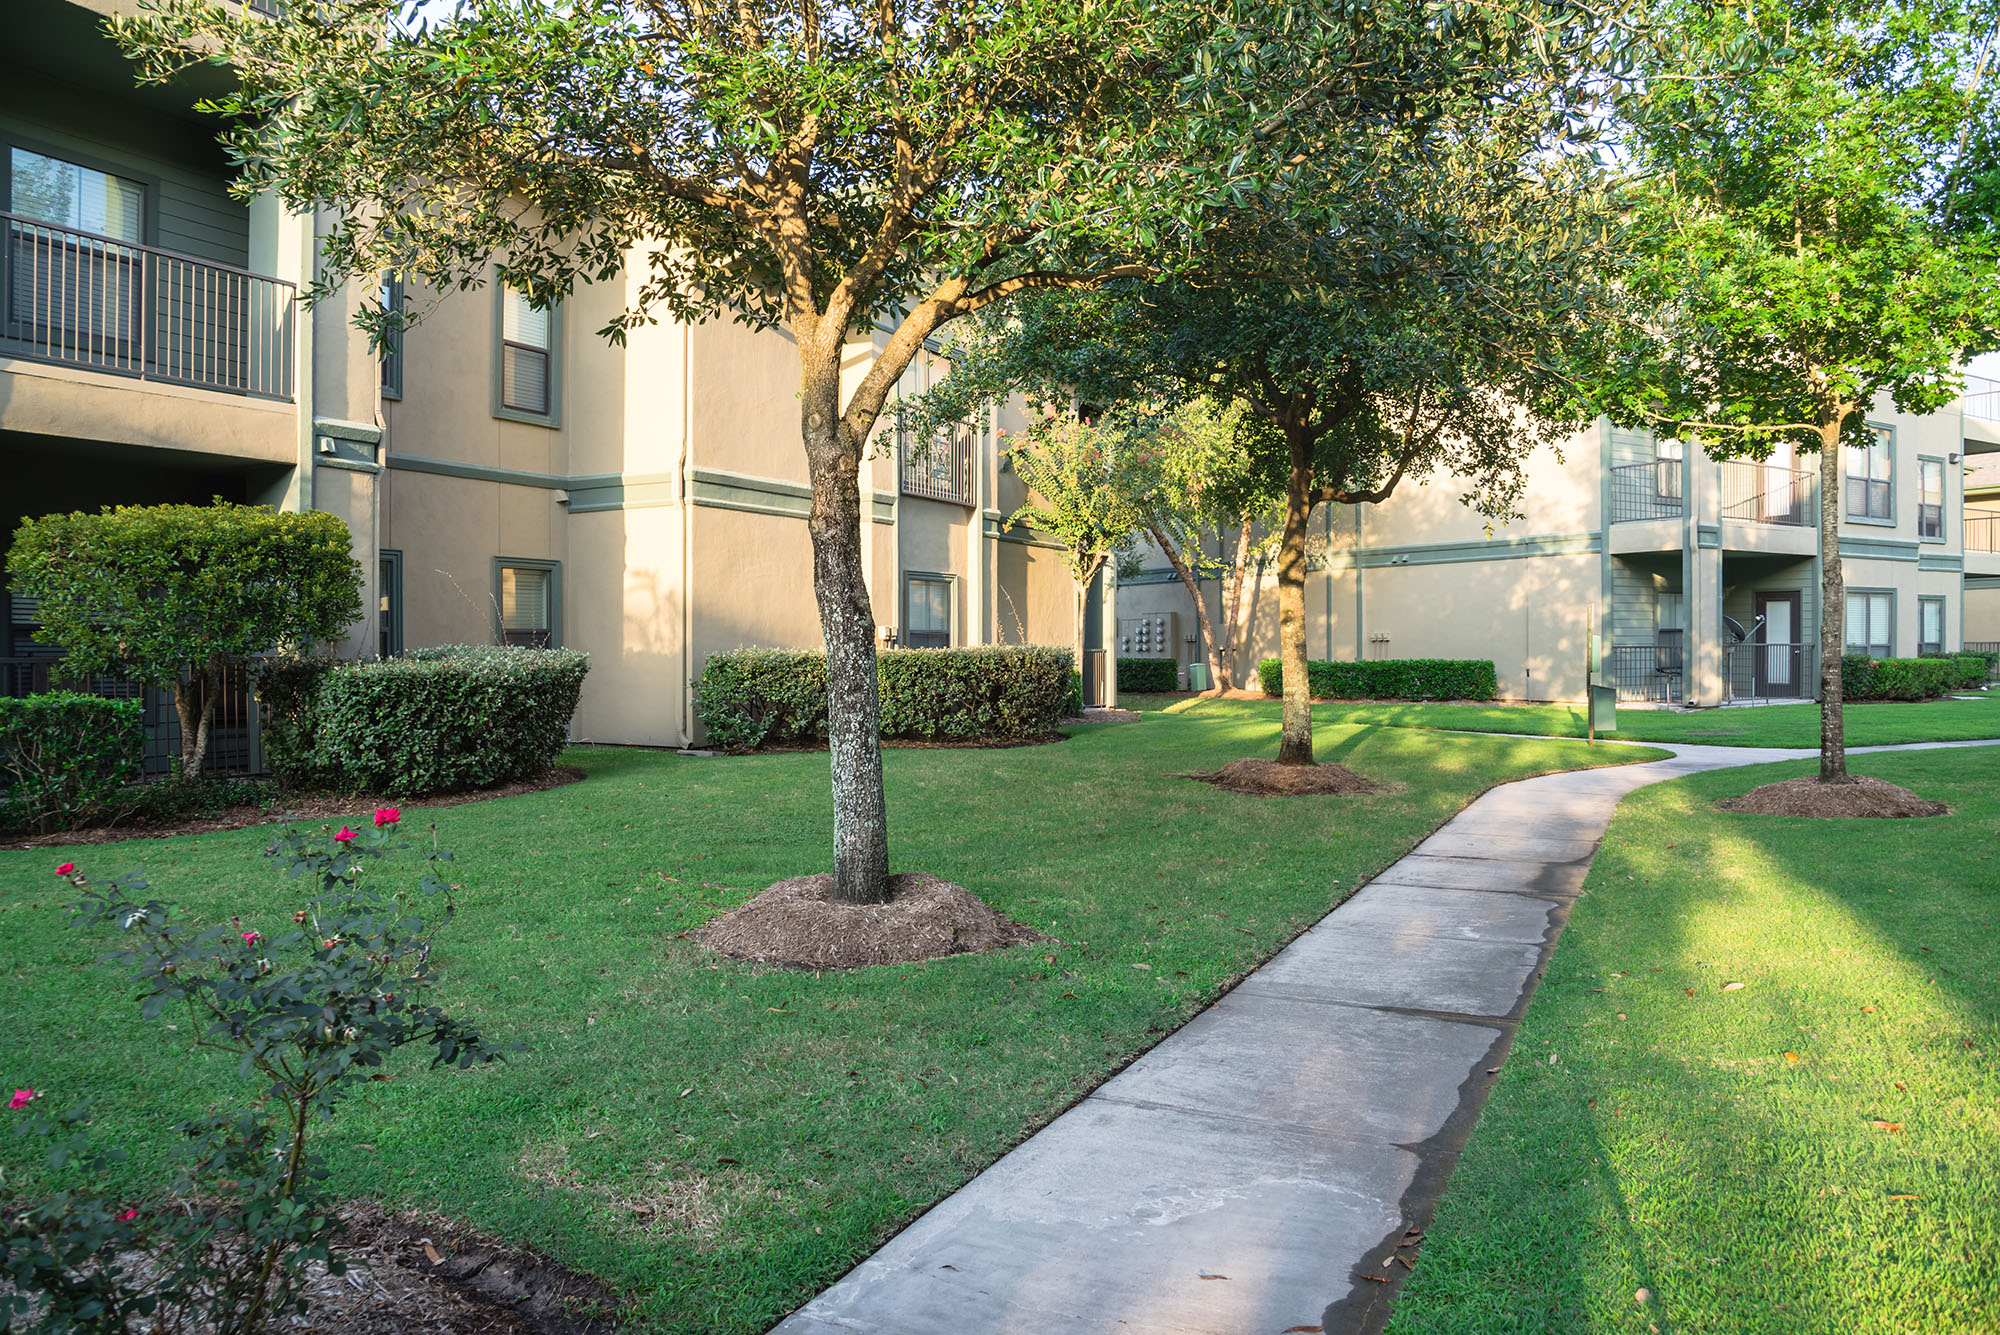 Clean lawn and tidy oak trees along a walkway through a typical apartment complex building in suburban area